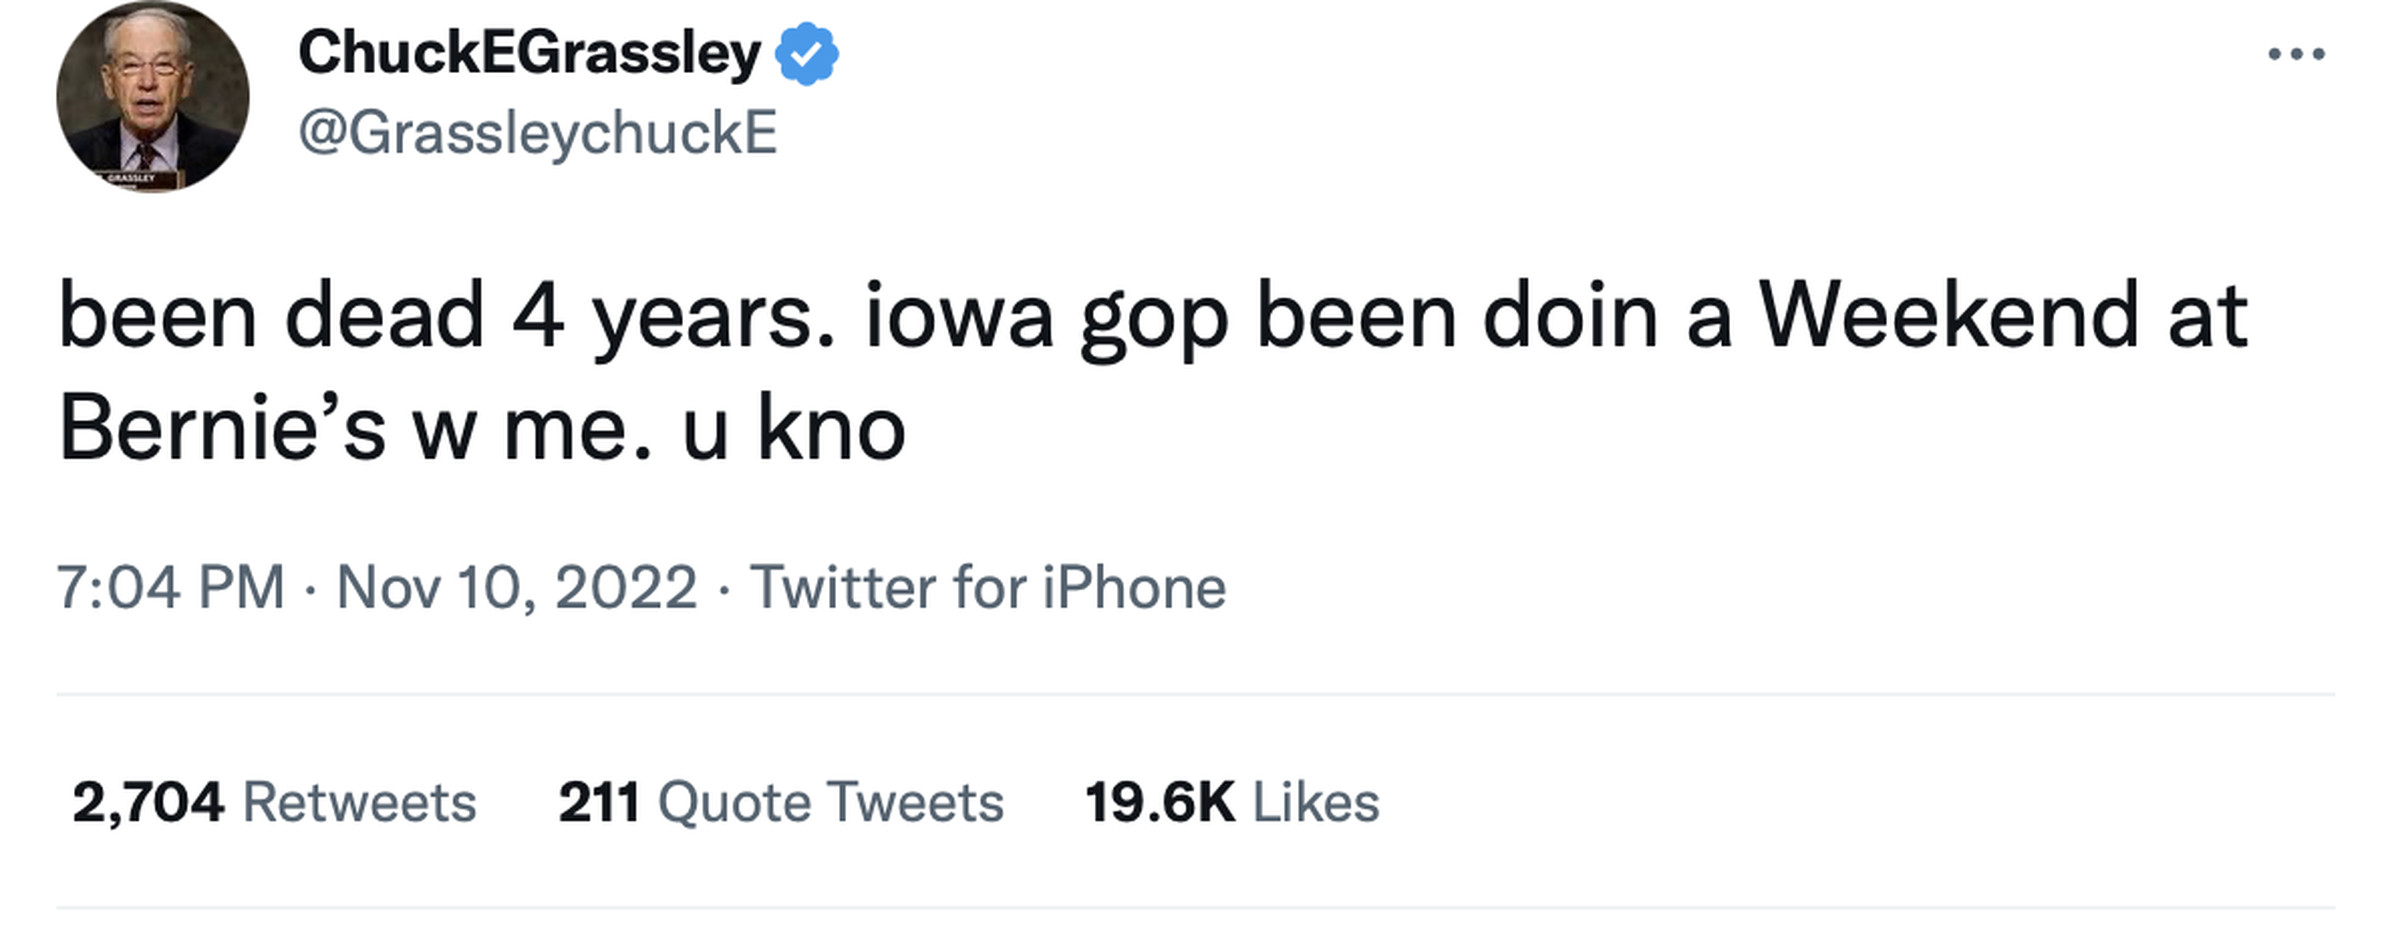 Screenshot of a verified account, @GrassleychuckE, tweeting “been dead 4 years.  iowa gop been doin a weekend at bernie's w me.  you know